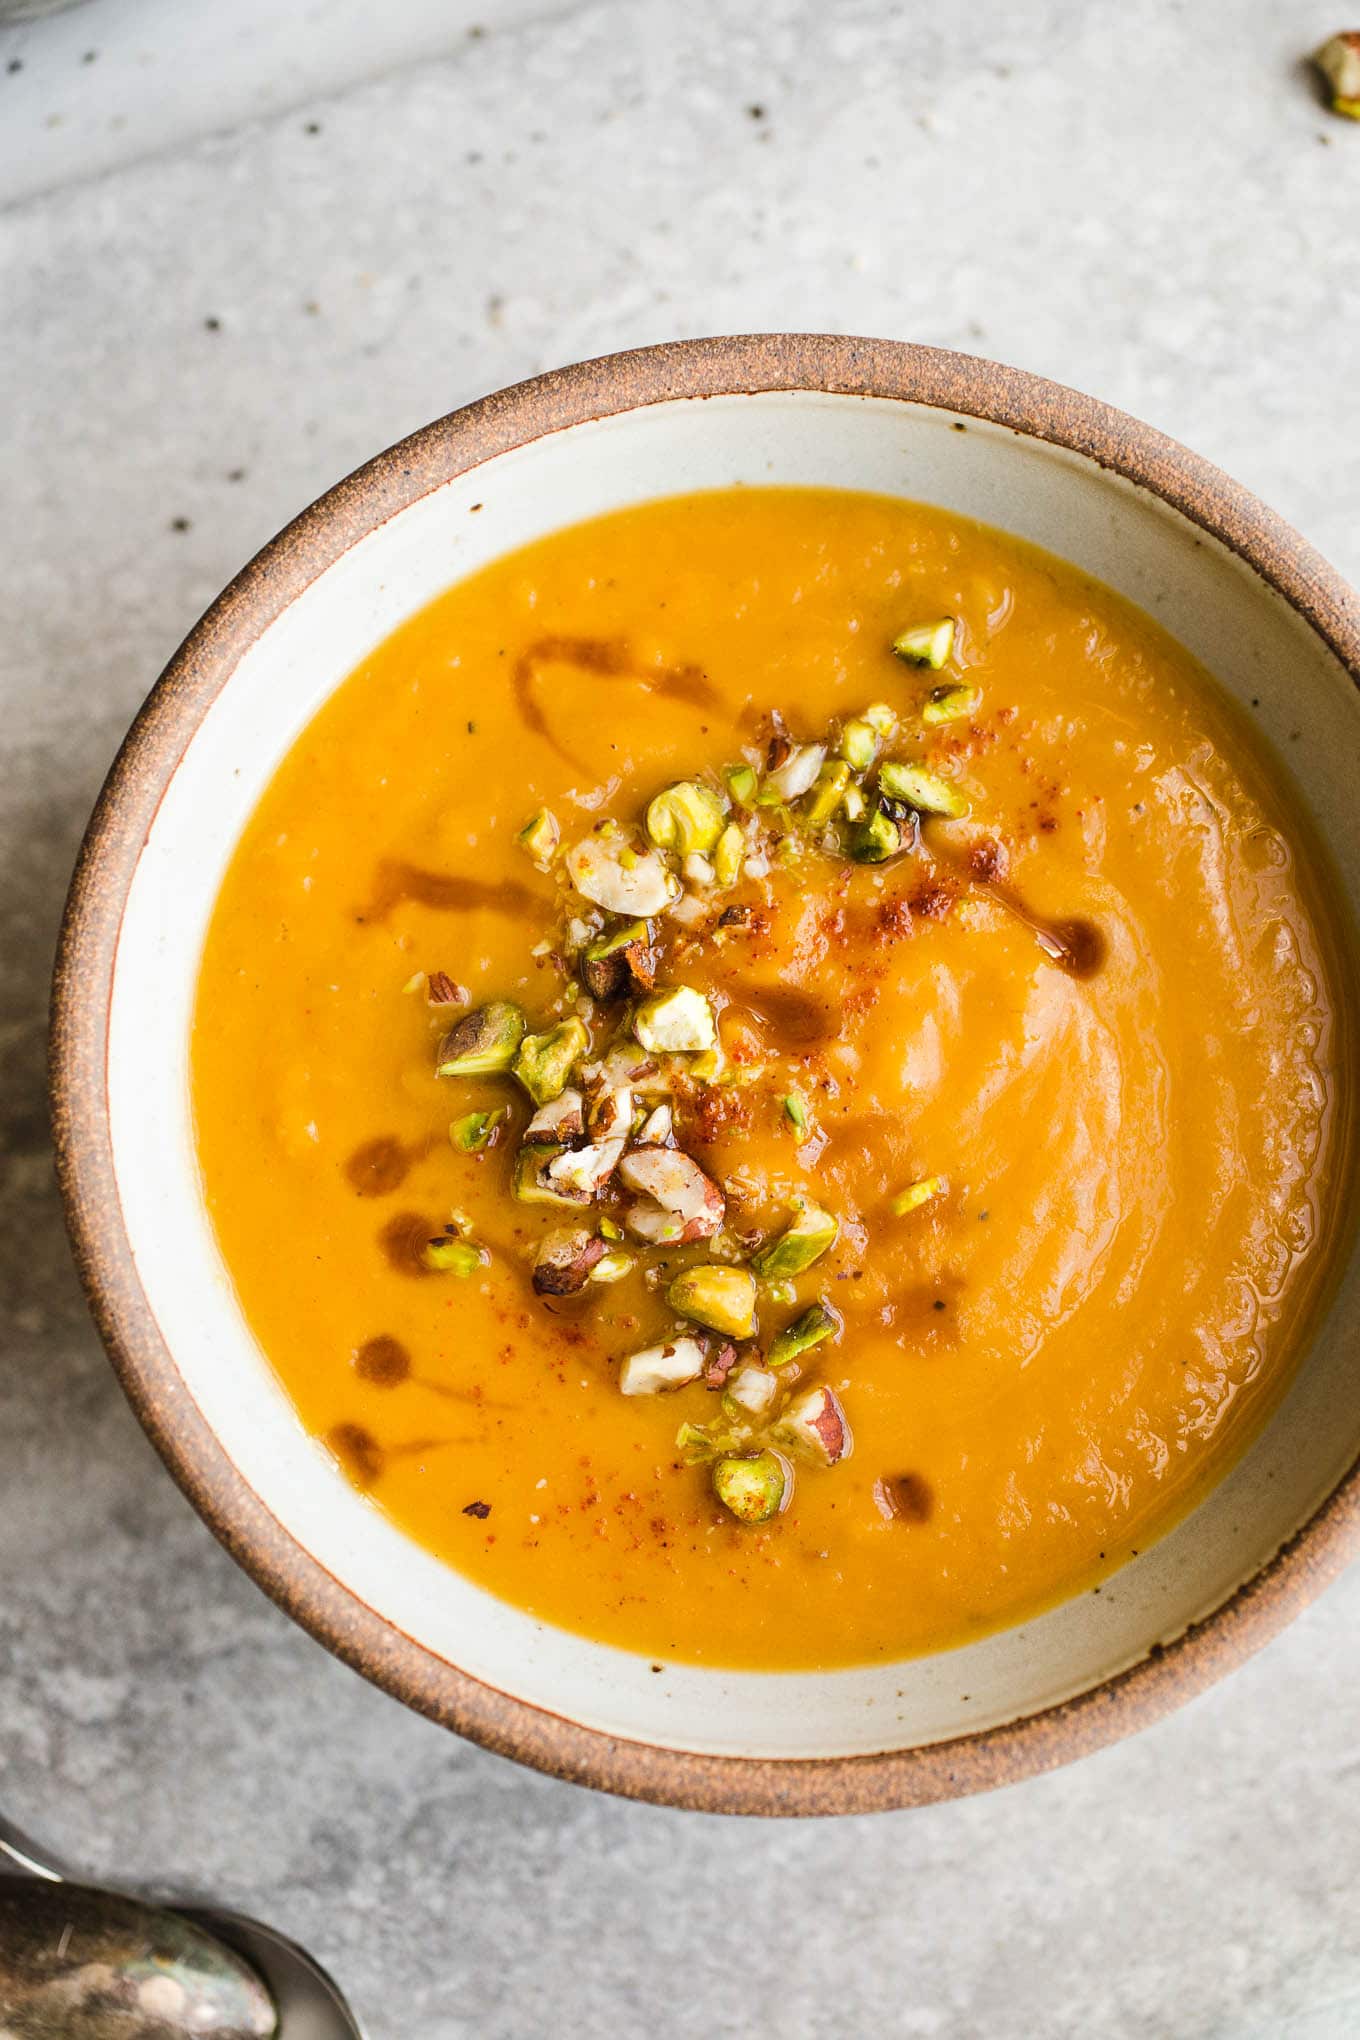 Creamy Vegan Sweet Potato Soup is gluten-free and ready in just 30 minutes. Made with minimal ingredients and warming spices.